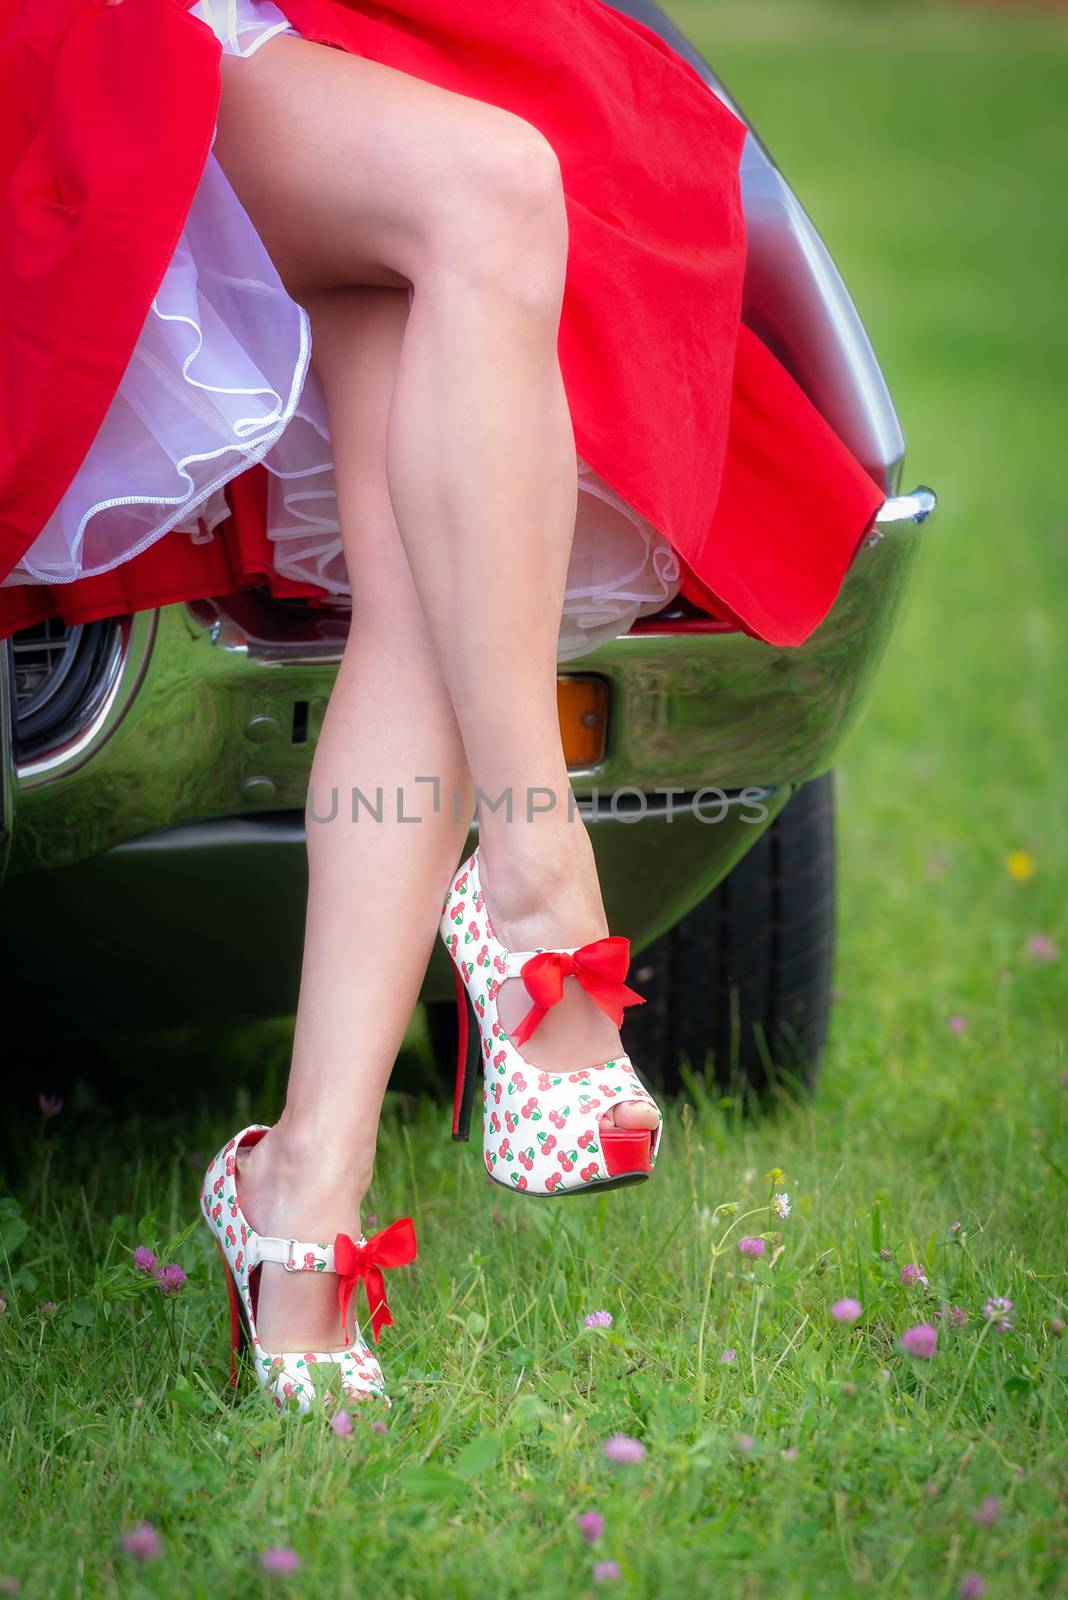 Pin Up Girl Style, young woman in red dress with long legs, wearing red high heels stilettos with cherries